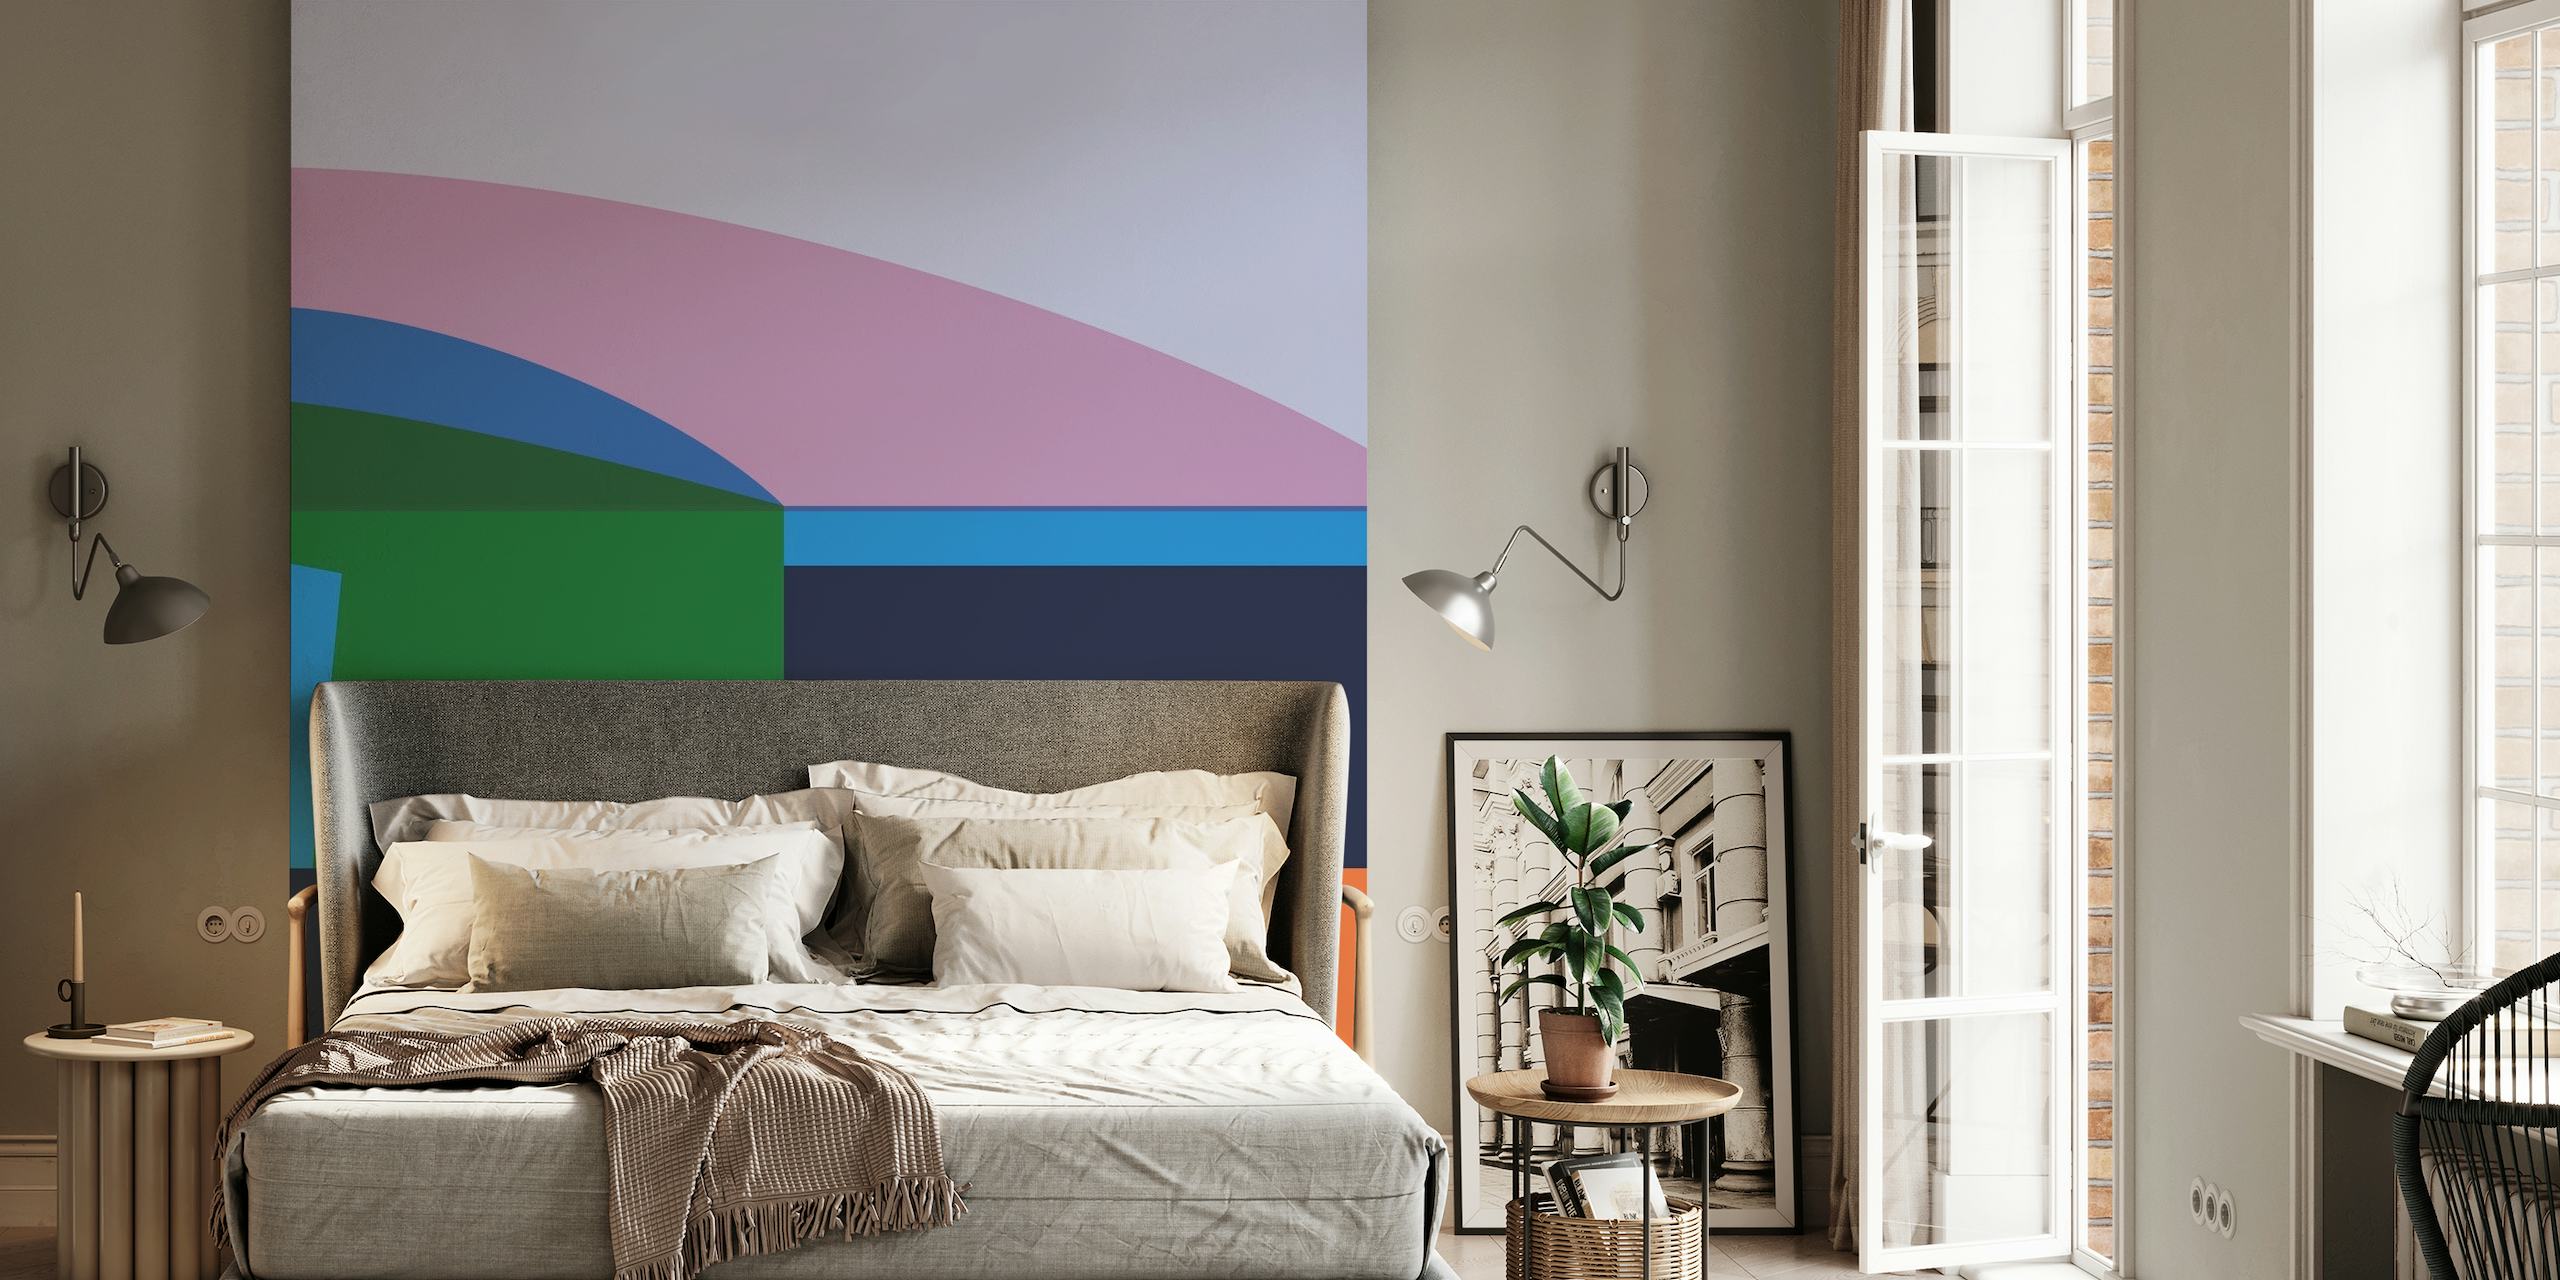 Abstract geometric wall mural with calming color blocks in shades of pink, green, blue, and orange